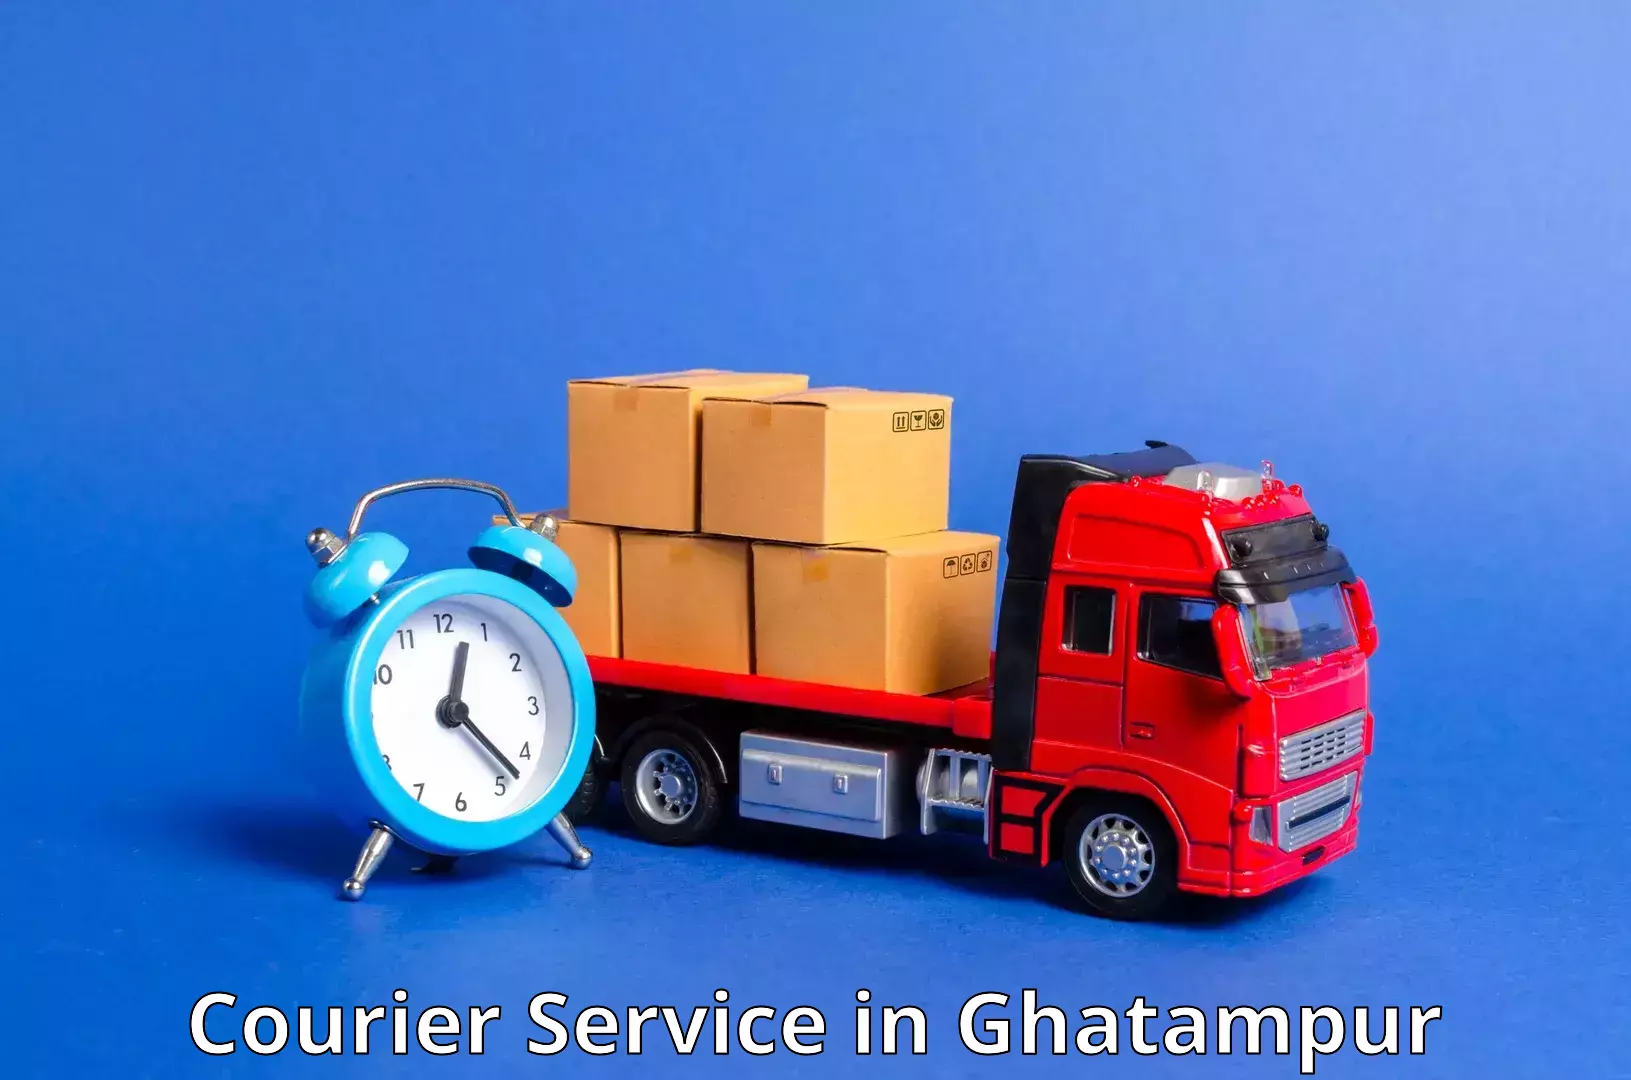 End-to-end delivery in Ghatampur